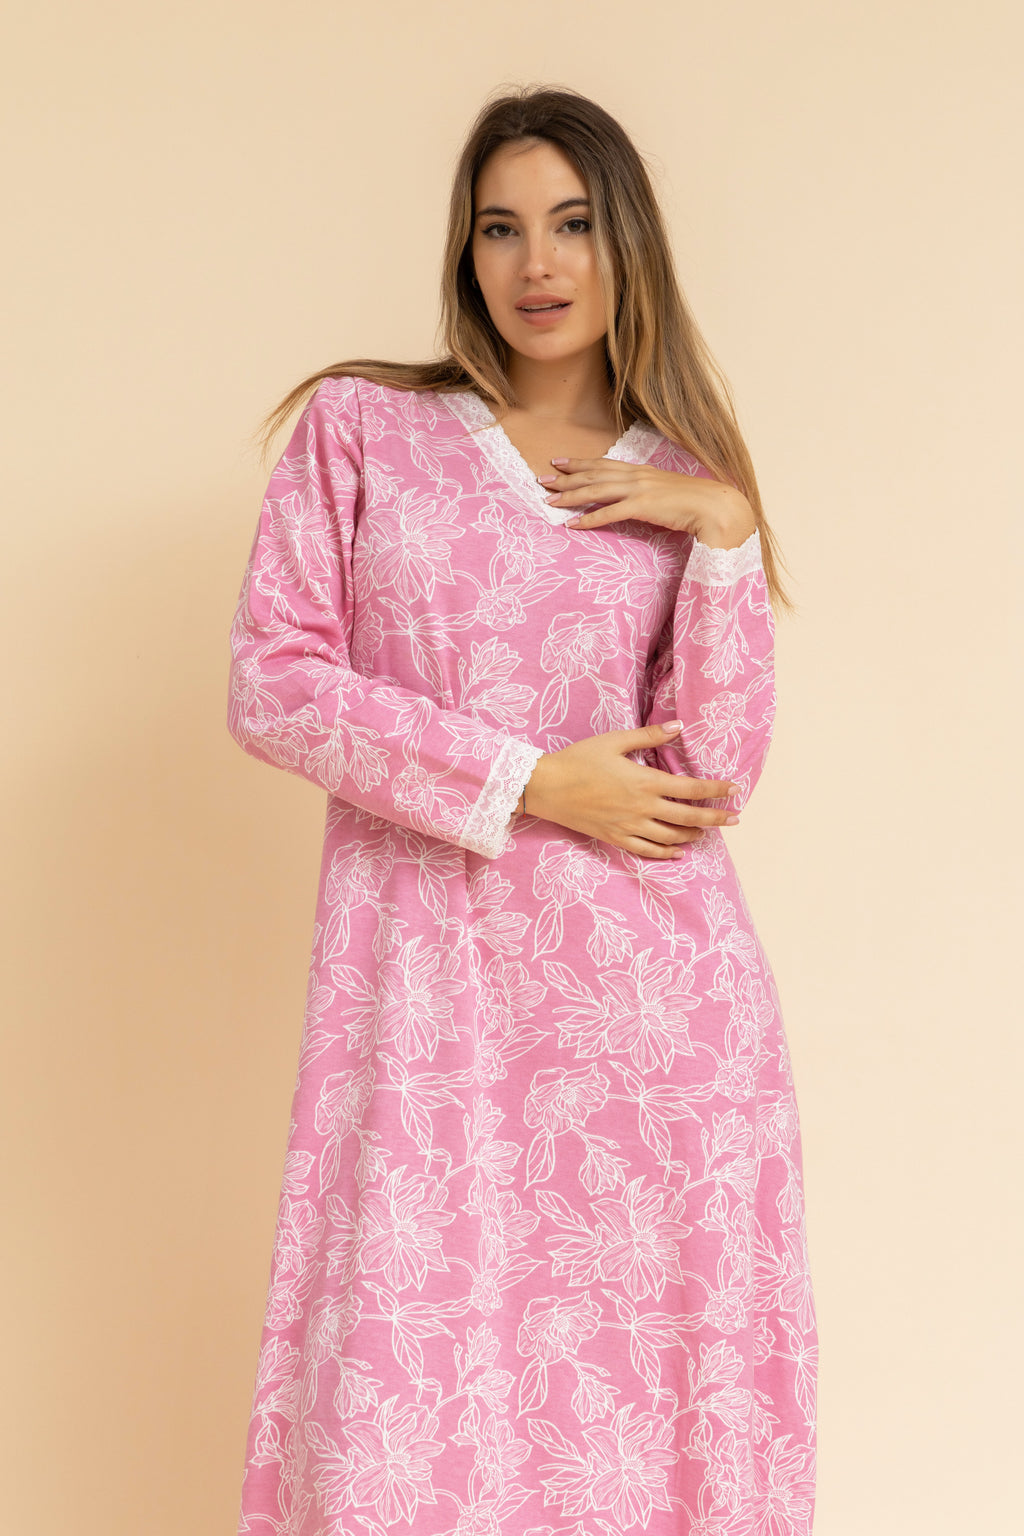 Floral Print 100% cotton nightgown with button detail – Charmaine Egypt